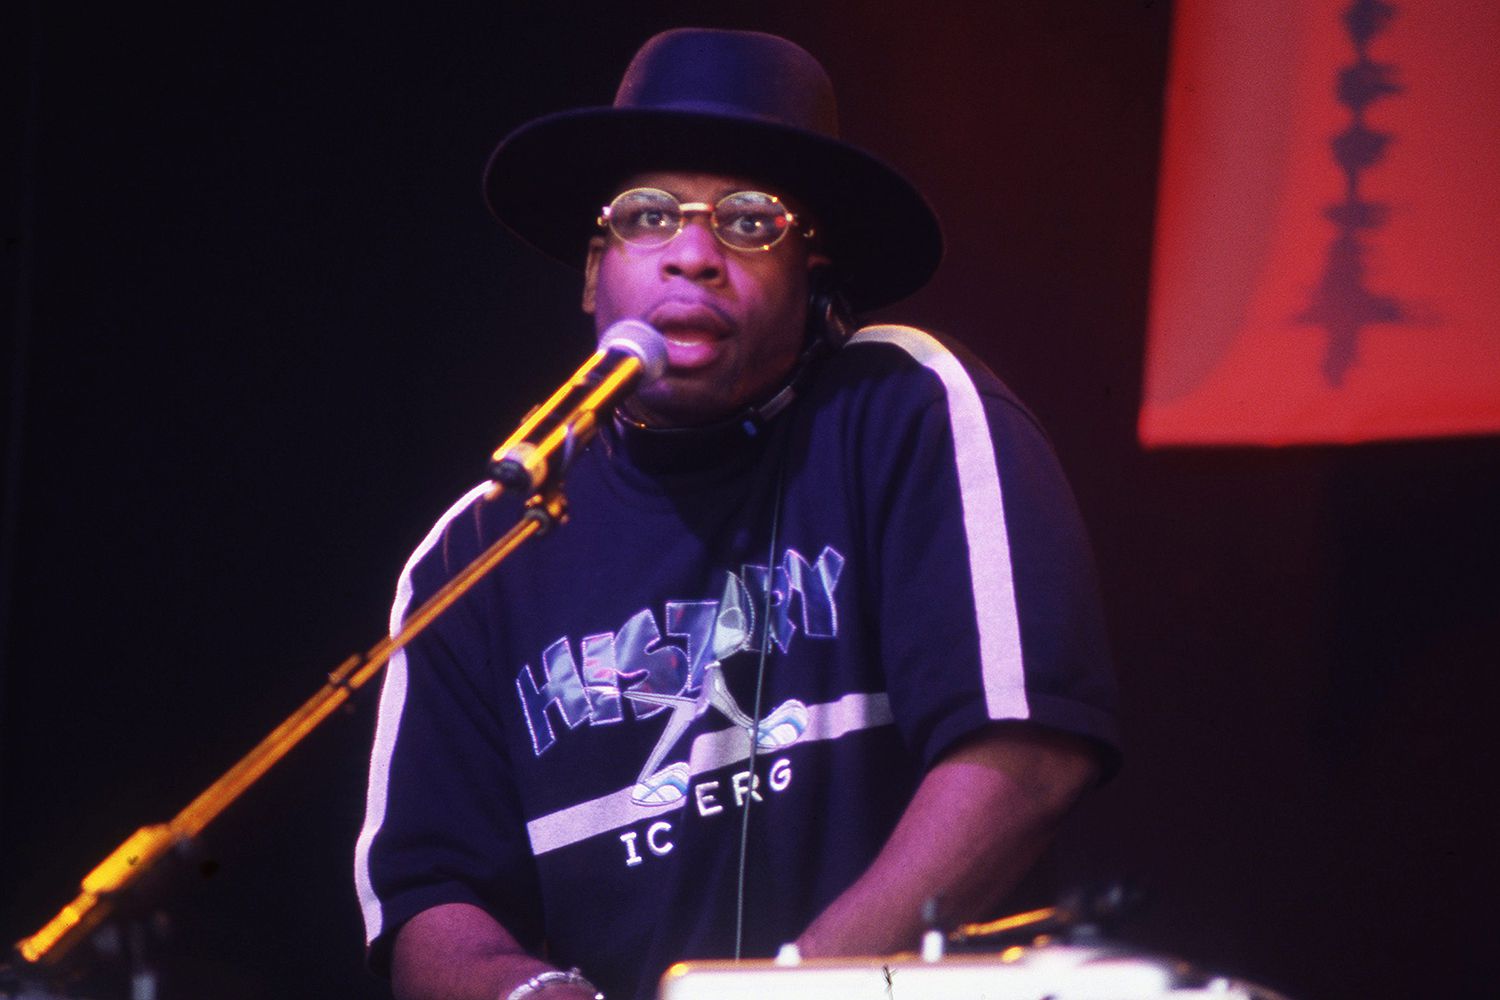 Jam Master Jay of Run DMC performs on stage at the Respect Festival, Finsbury Park